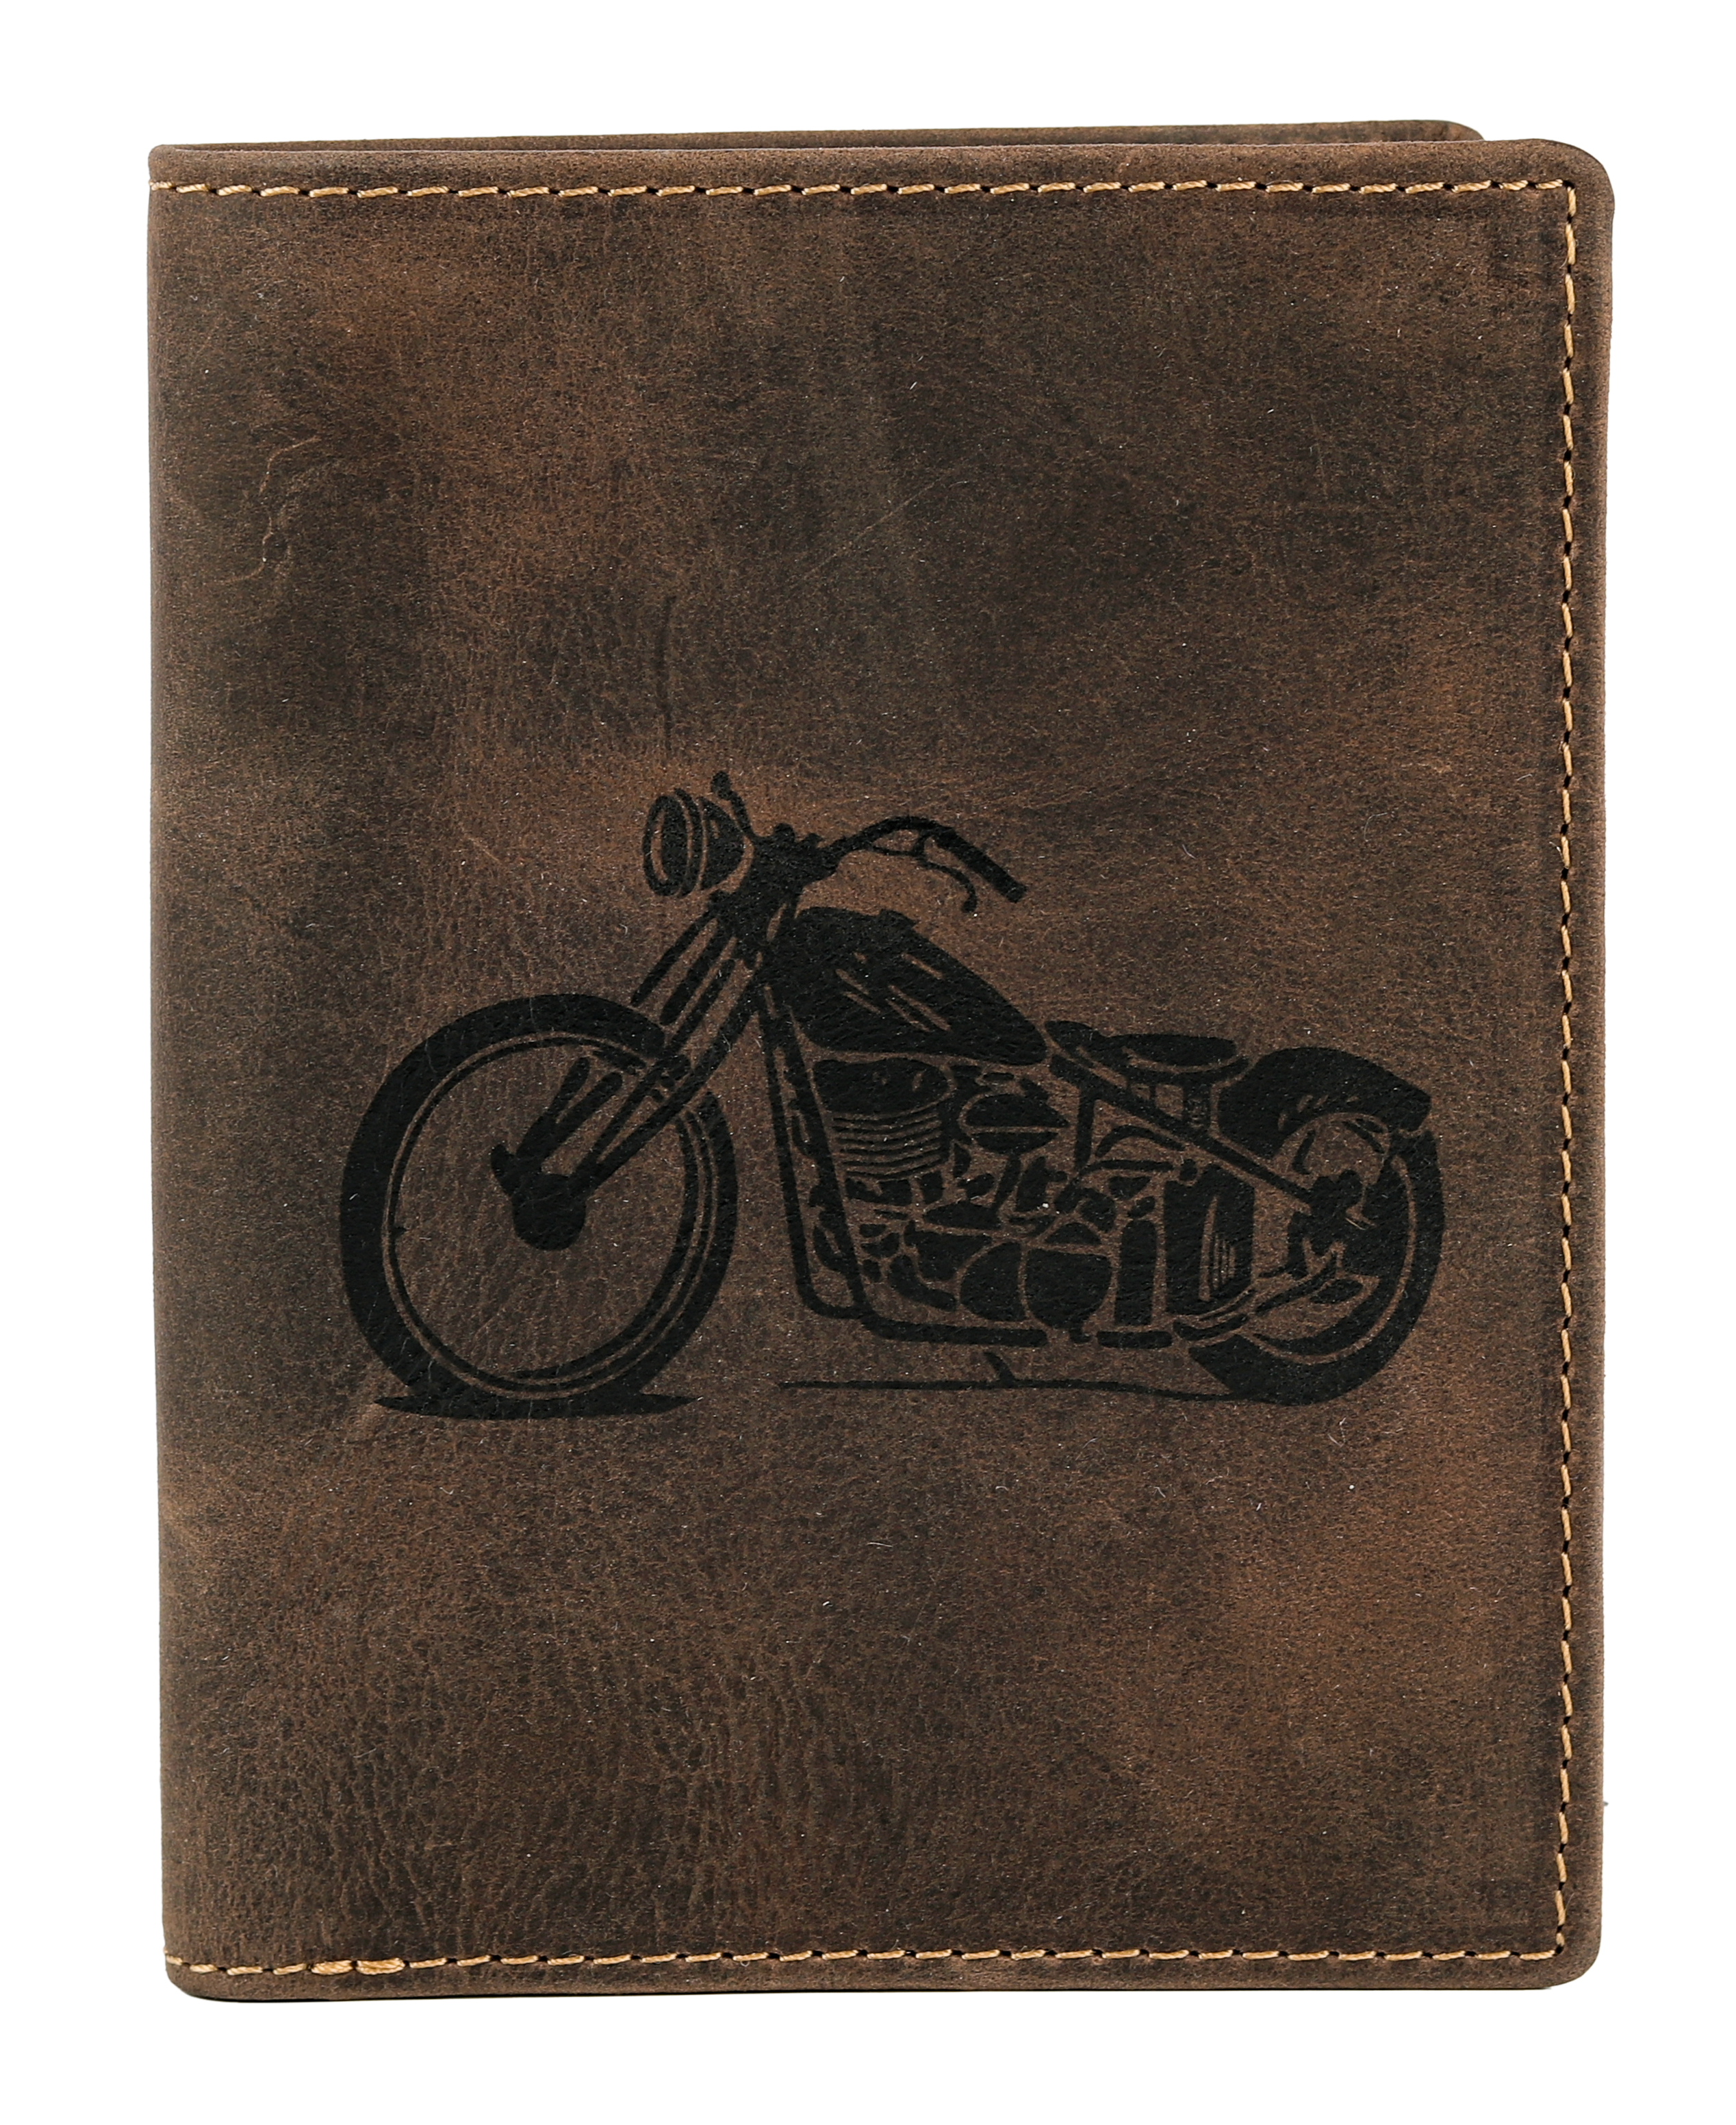 BOL/Open Road Men's Motorycle Distressed Leather Wallet